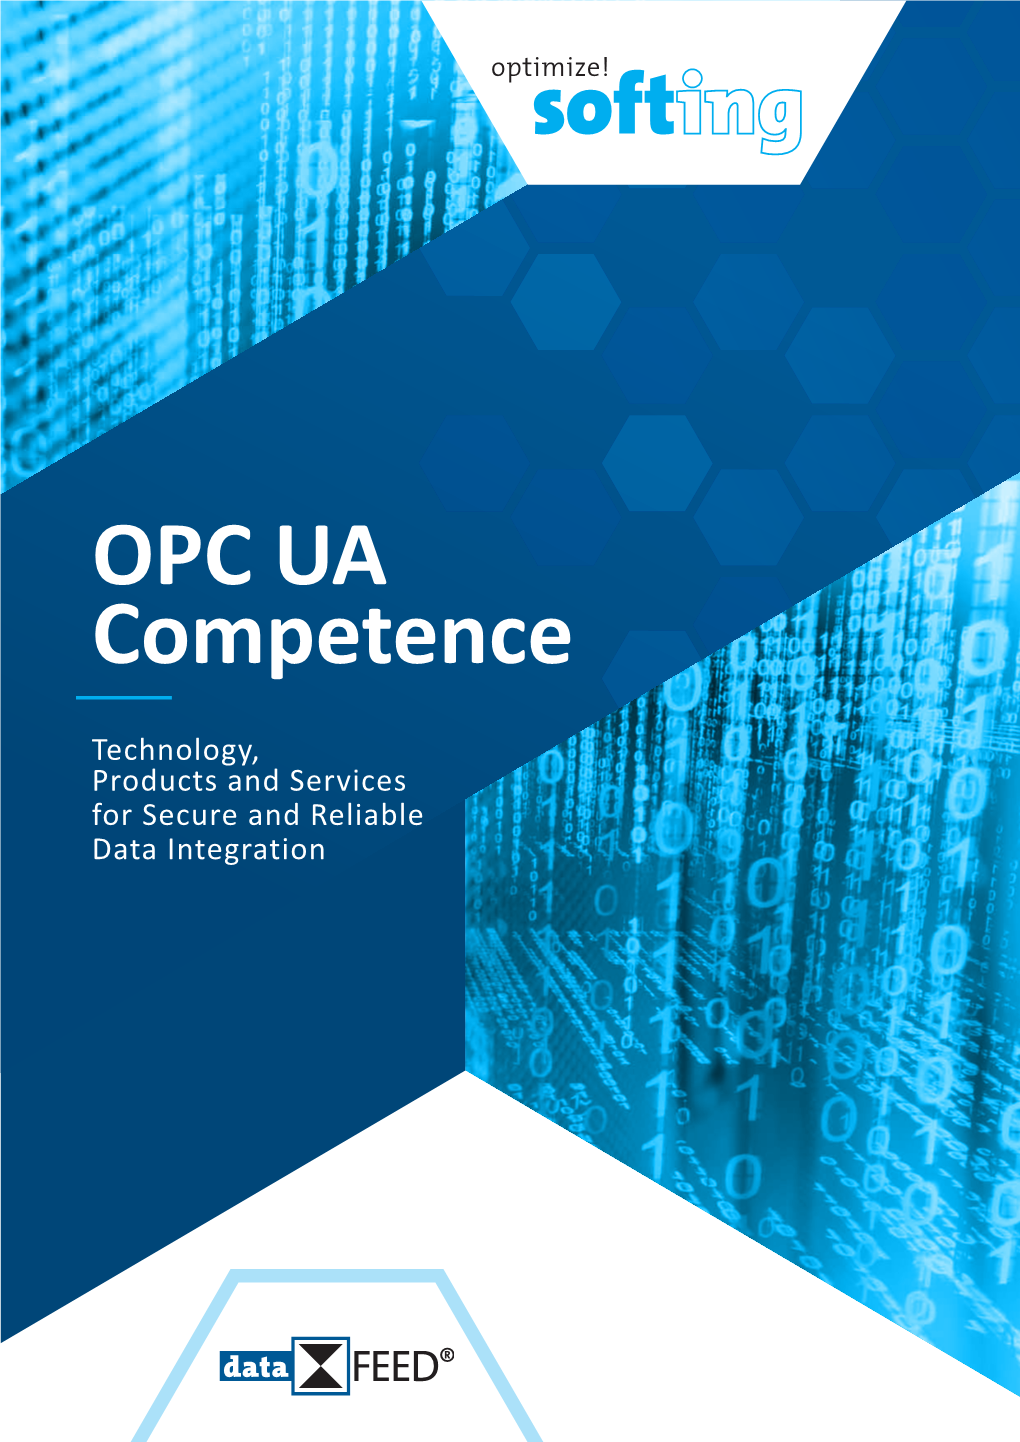 OPC UA Competence REST Technology, Products and Services for Secure and Reliable Data Integration